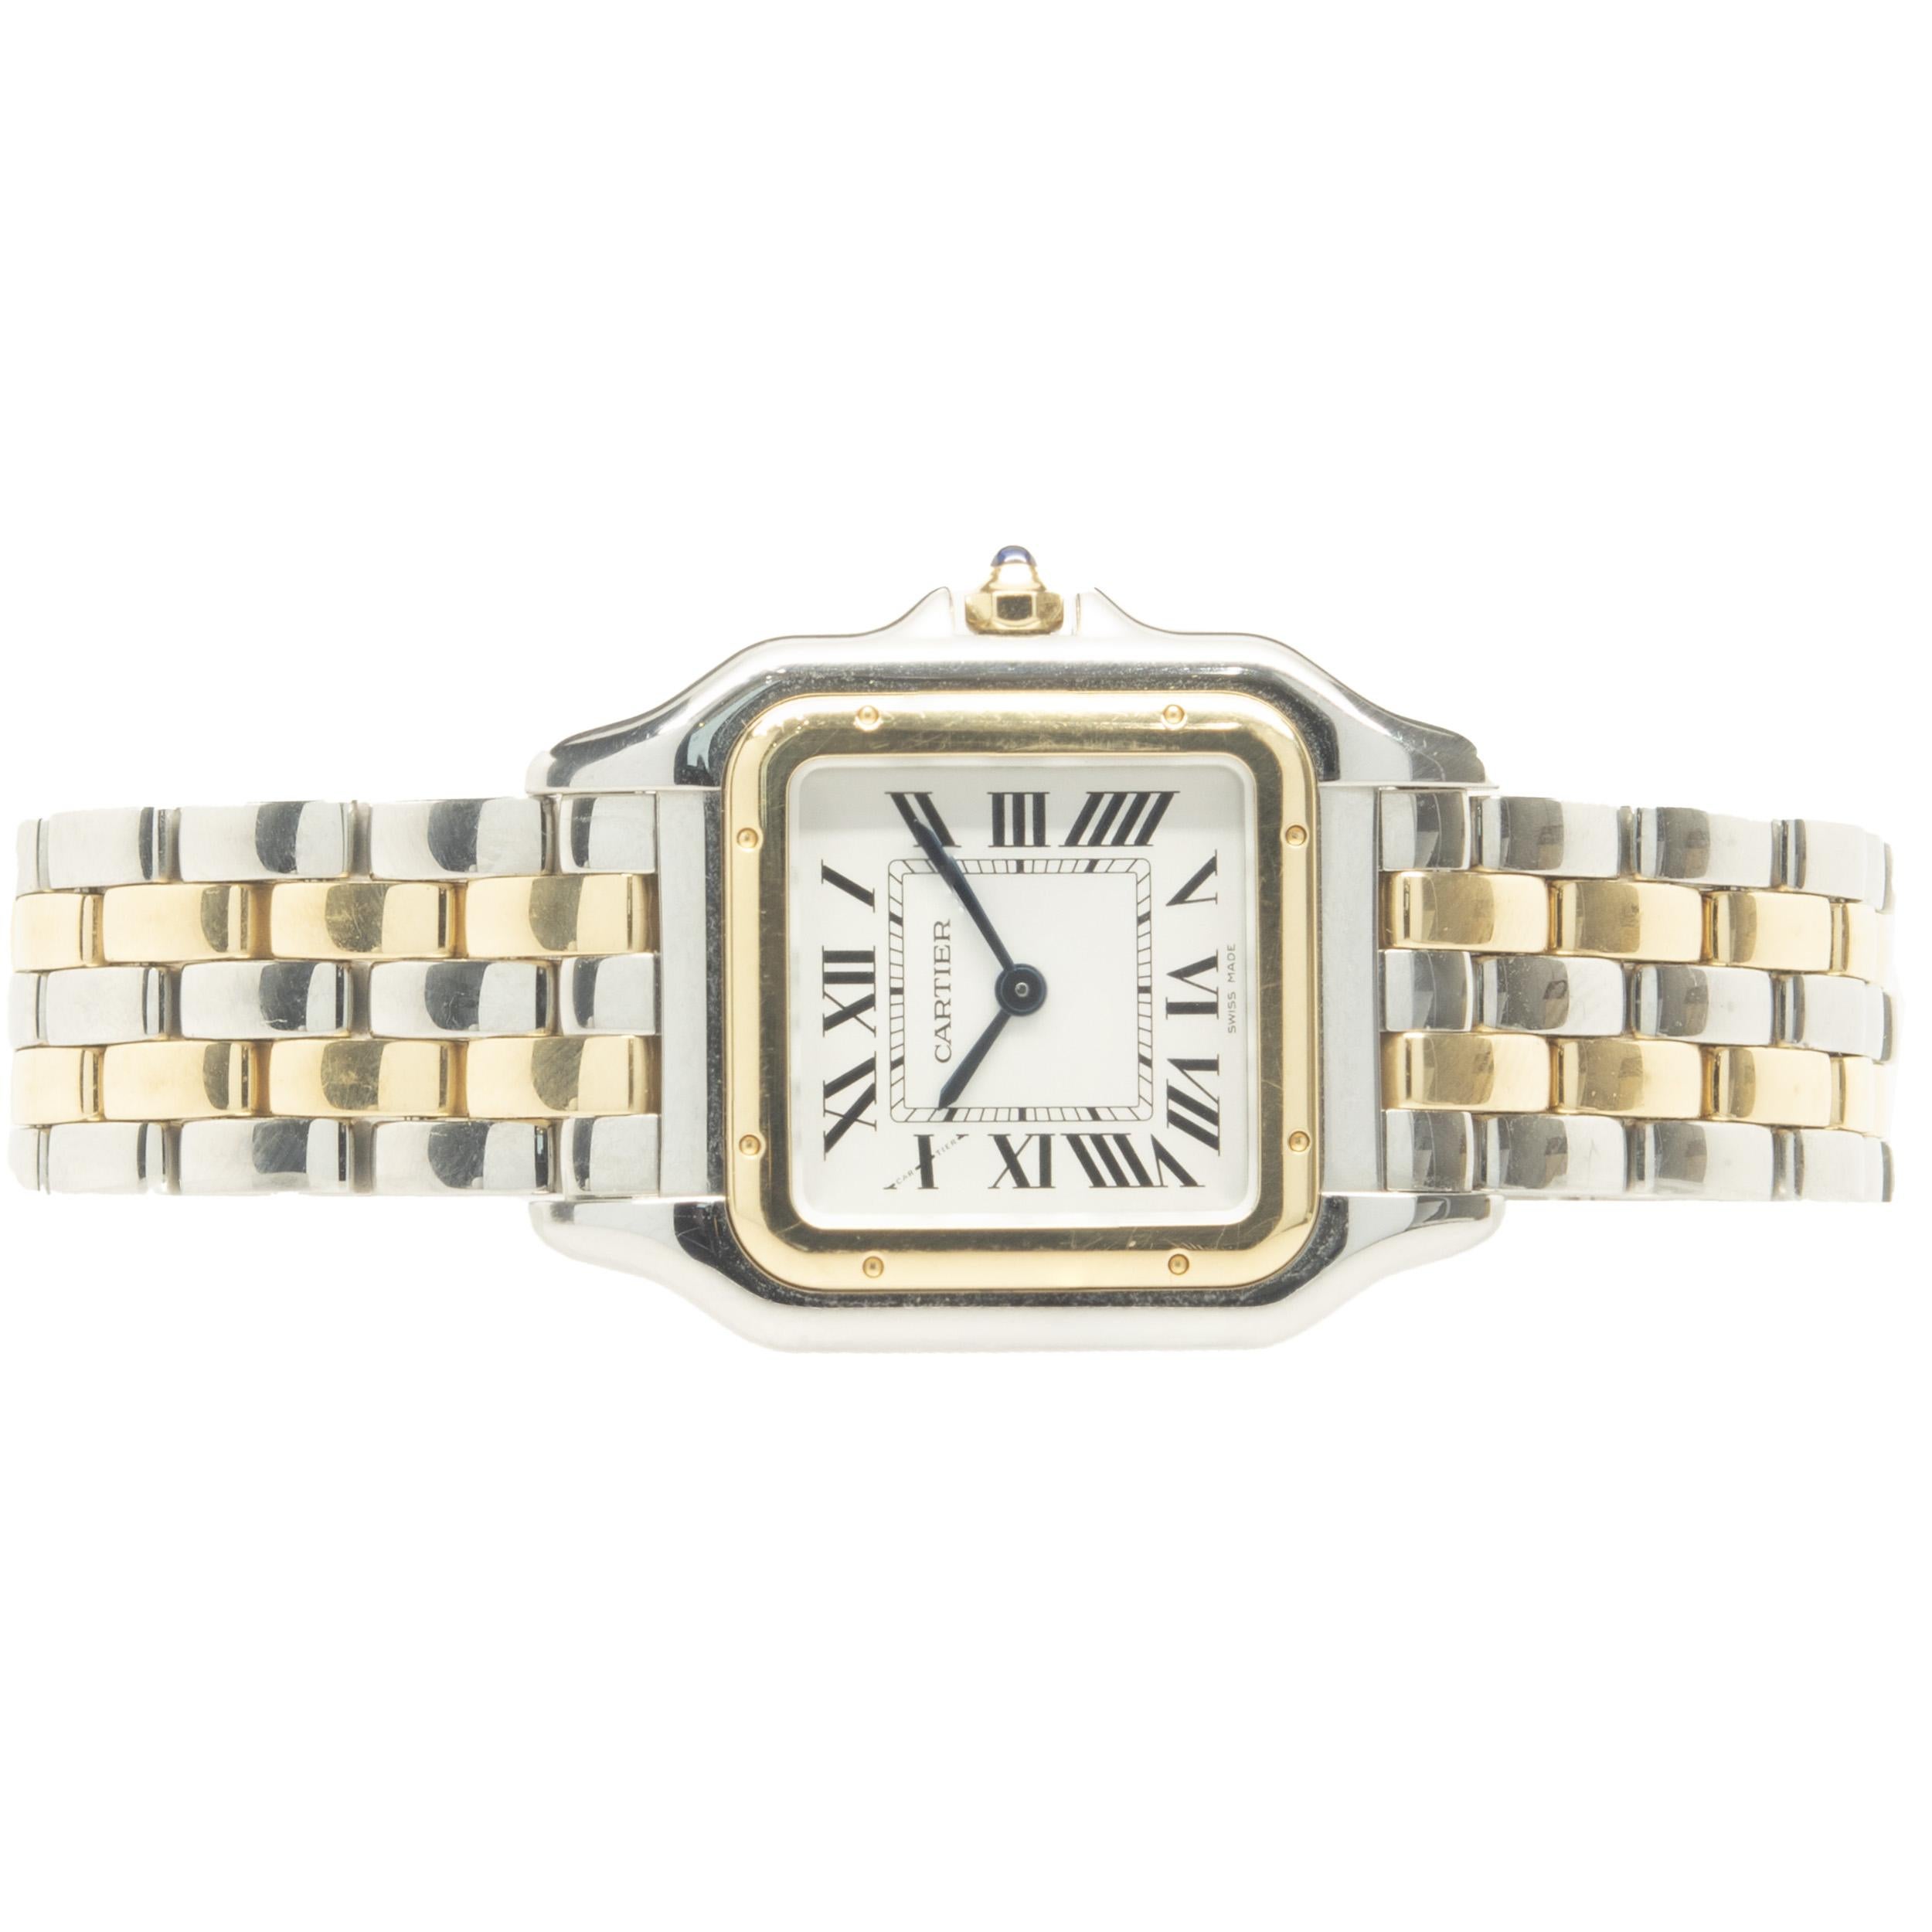 Movement: quartz
Function: hours, minutes, seconds, date
Case: 29 x 37mm rectangular case, smooth bezel, push pull crown, sapphire crystal
Dial: white roman dial, steel sword sweeping hands
Band: Cartier stainless steel & 18KY panther bracelet,